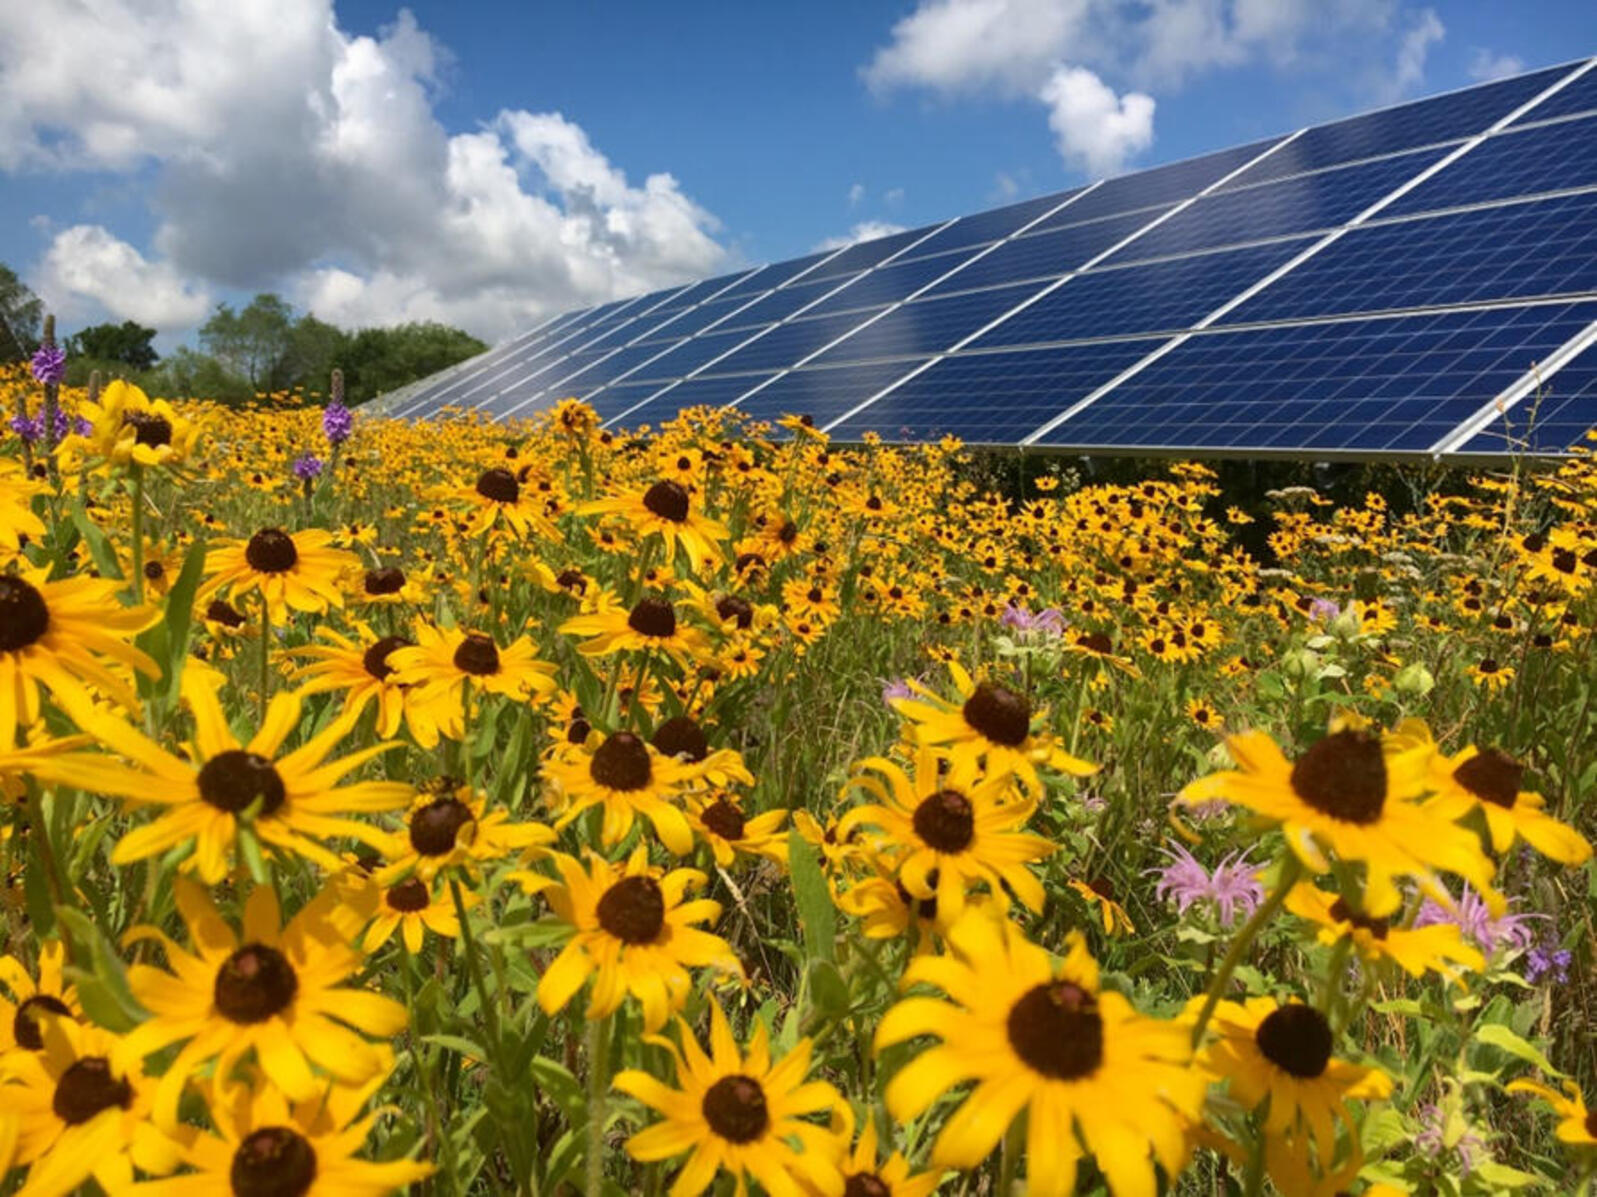 A field of bright orange native coneflowers covers the ground in front of a large solar panel